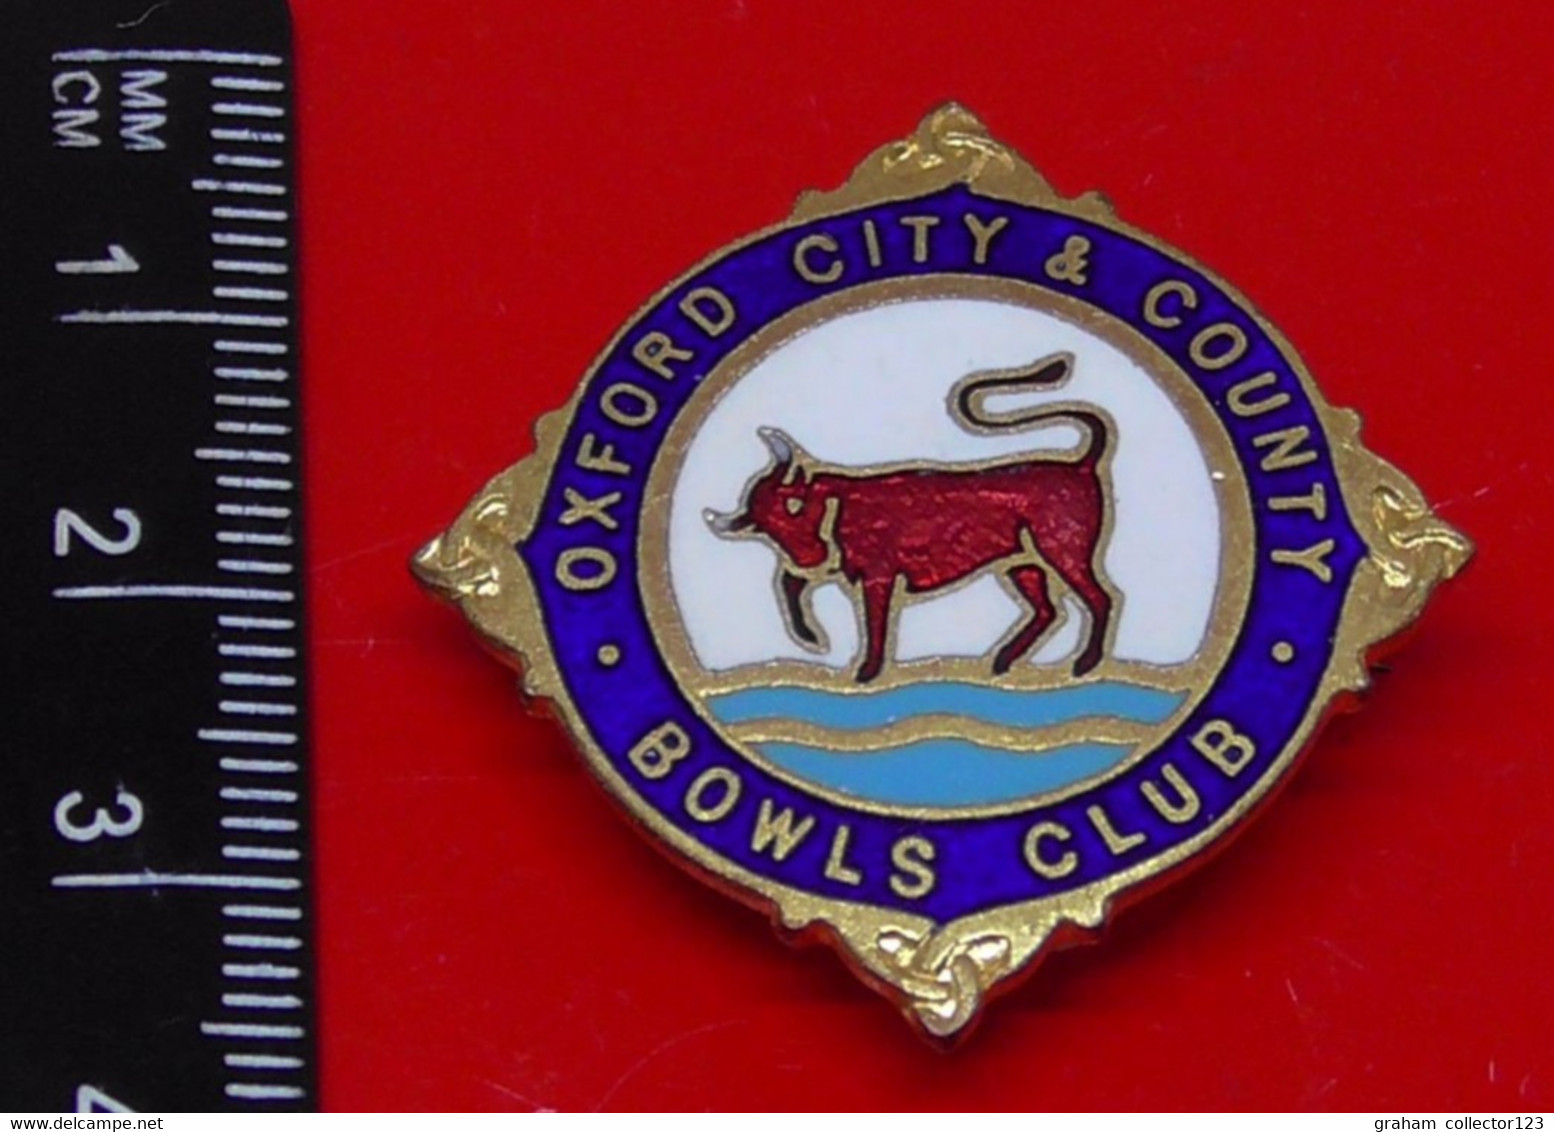 Vintage Enamel And Metal Badge Bowling Bowler Bowls Lawn Bowls Oxford City And County Bowls Club Red Bull H W Miller Ltd - Bowling